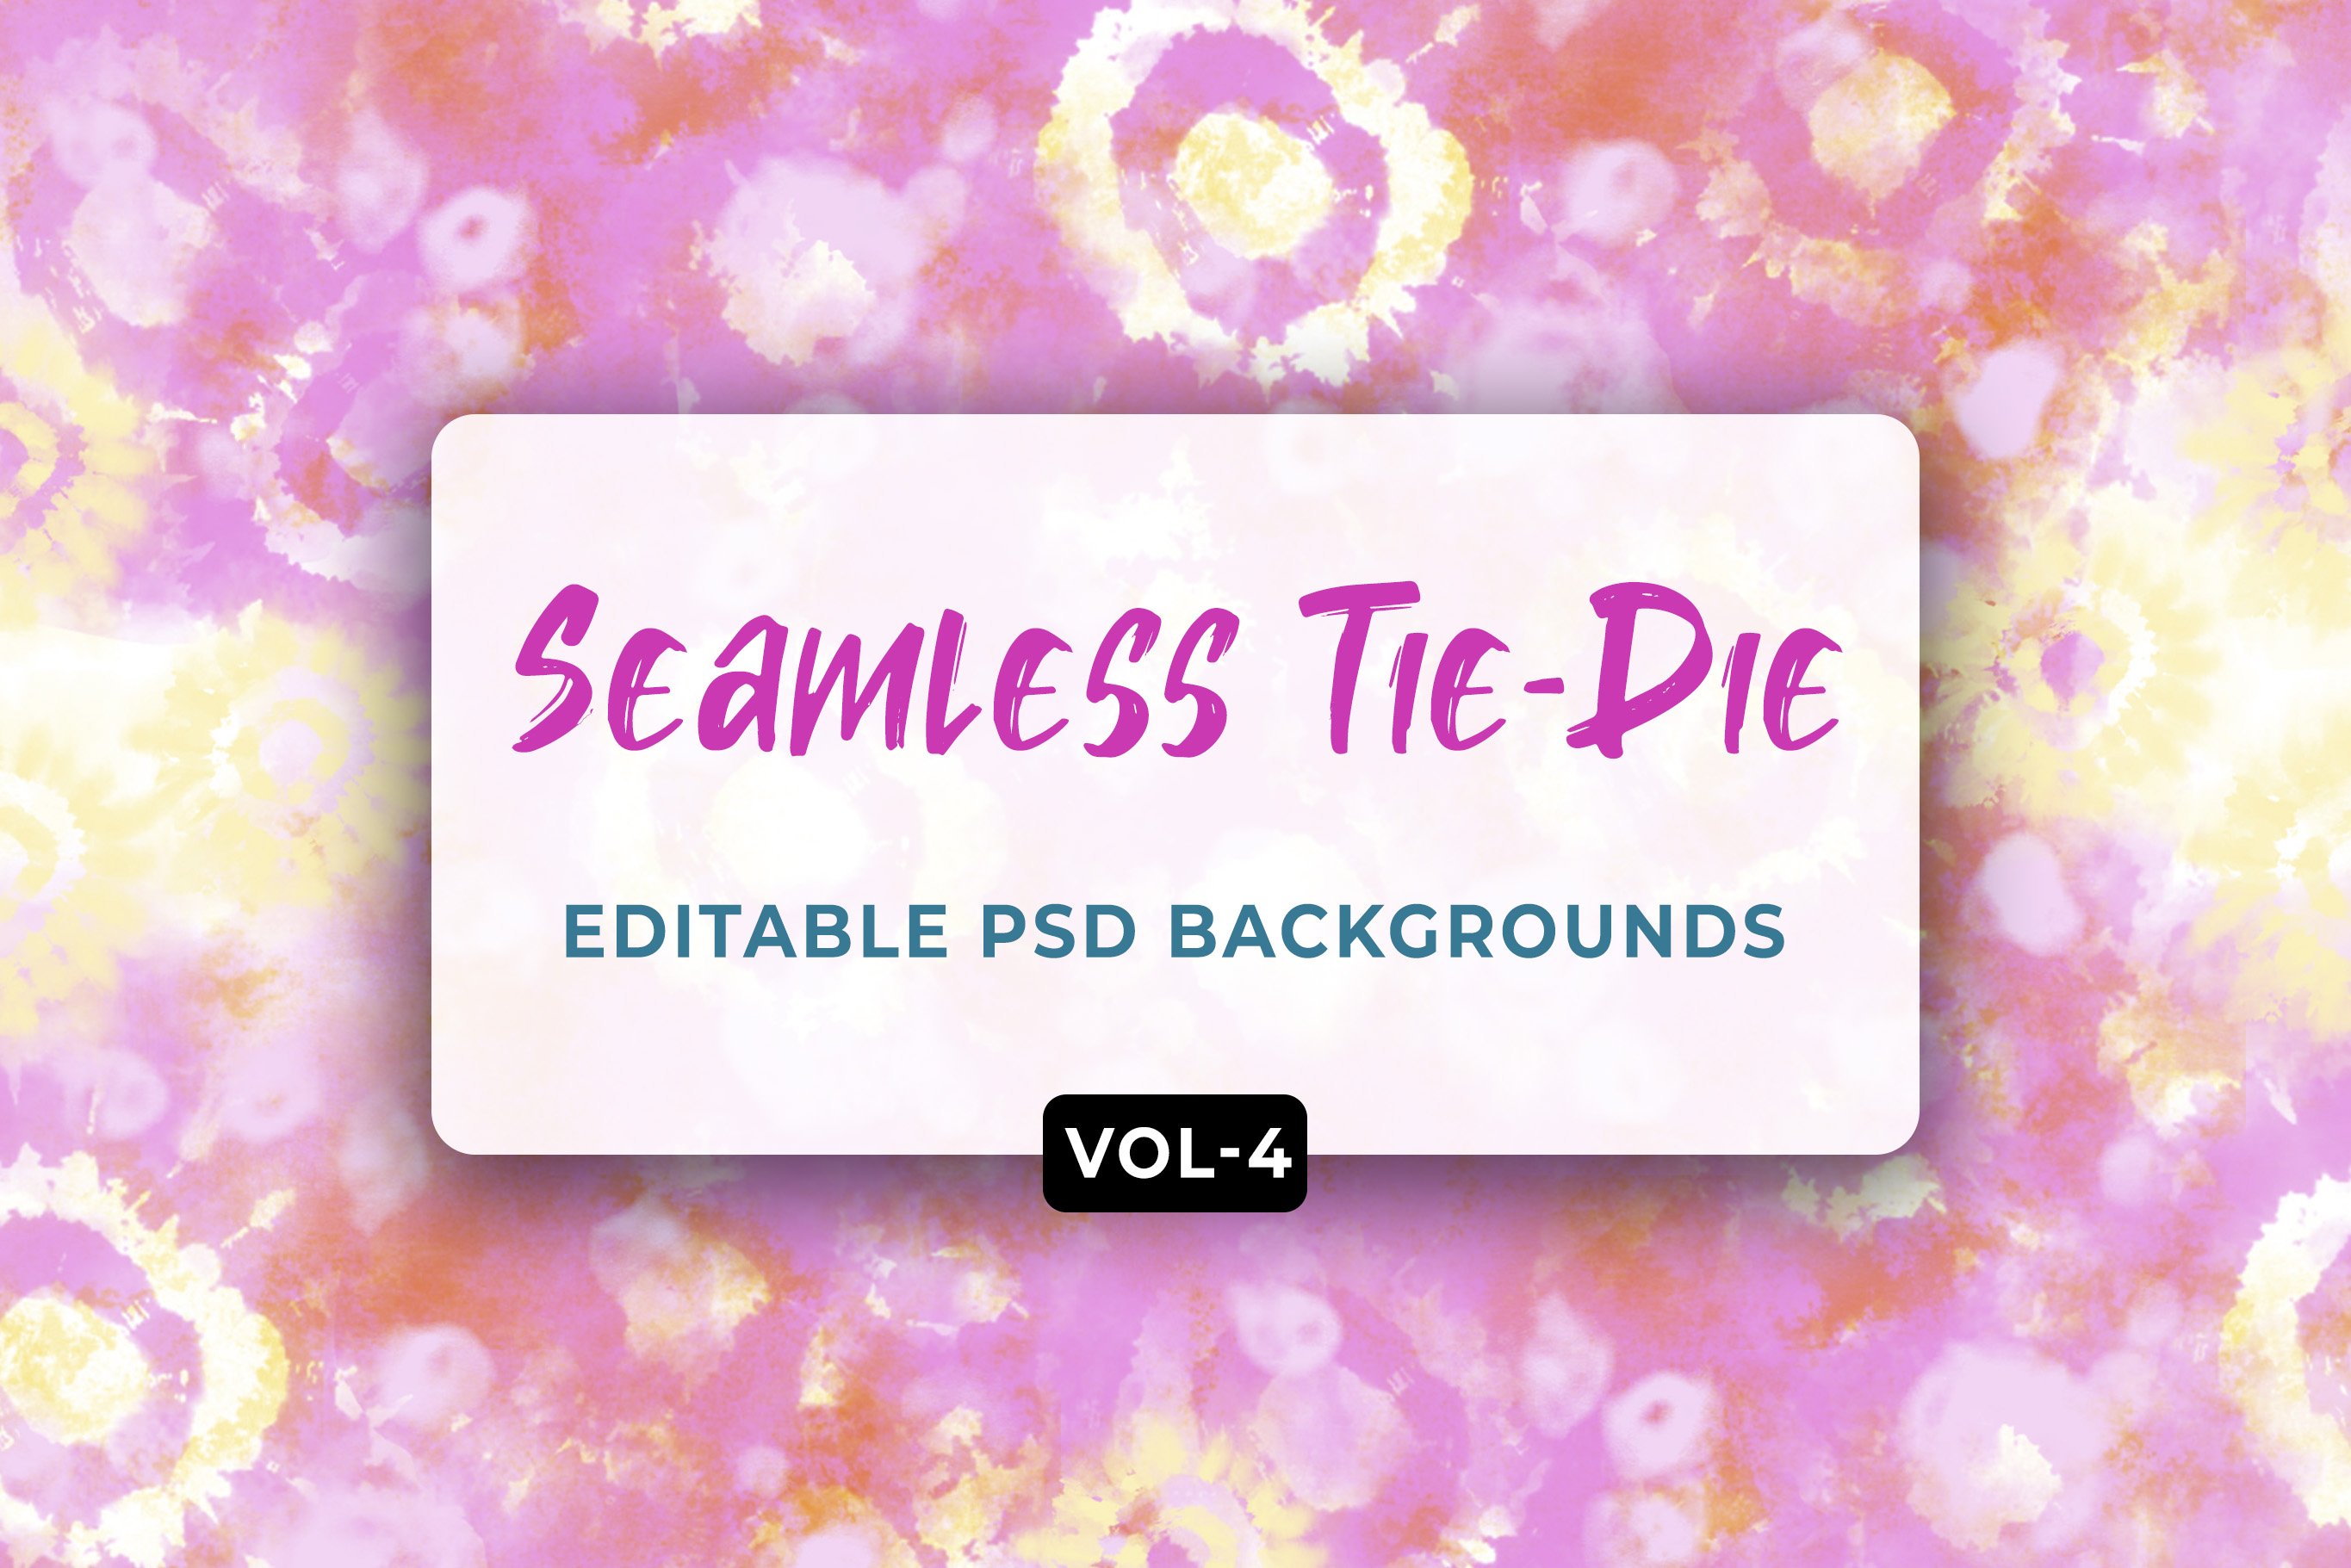 Tie Dye Seamless Patterns Vol- 04 cover image.